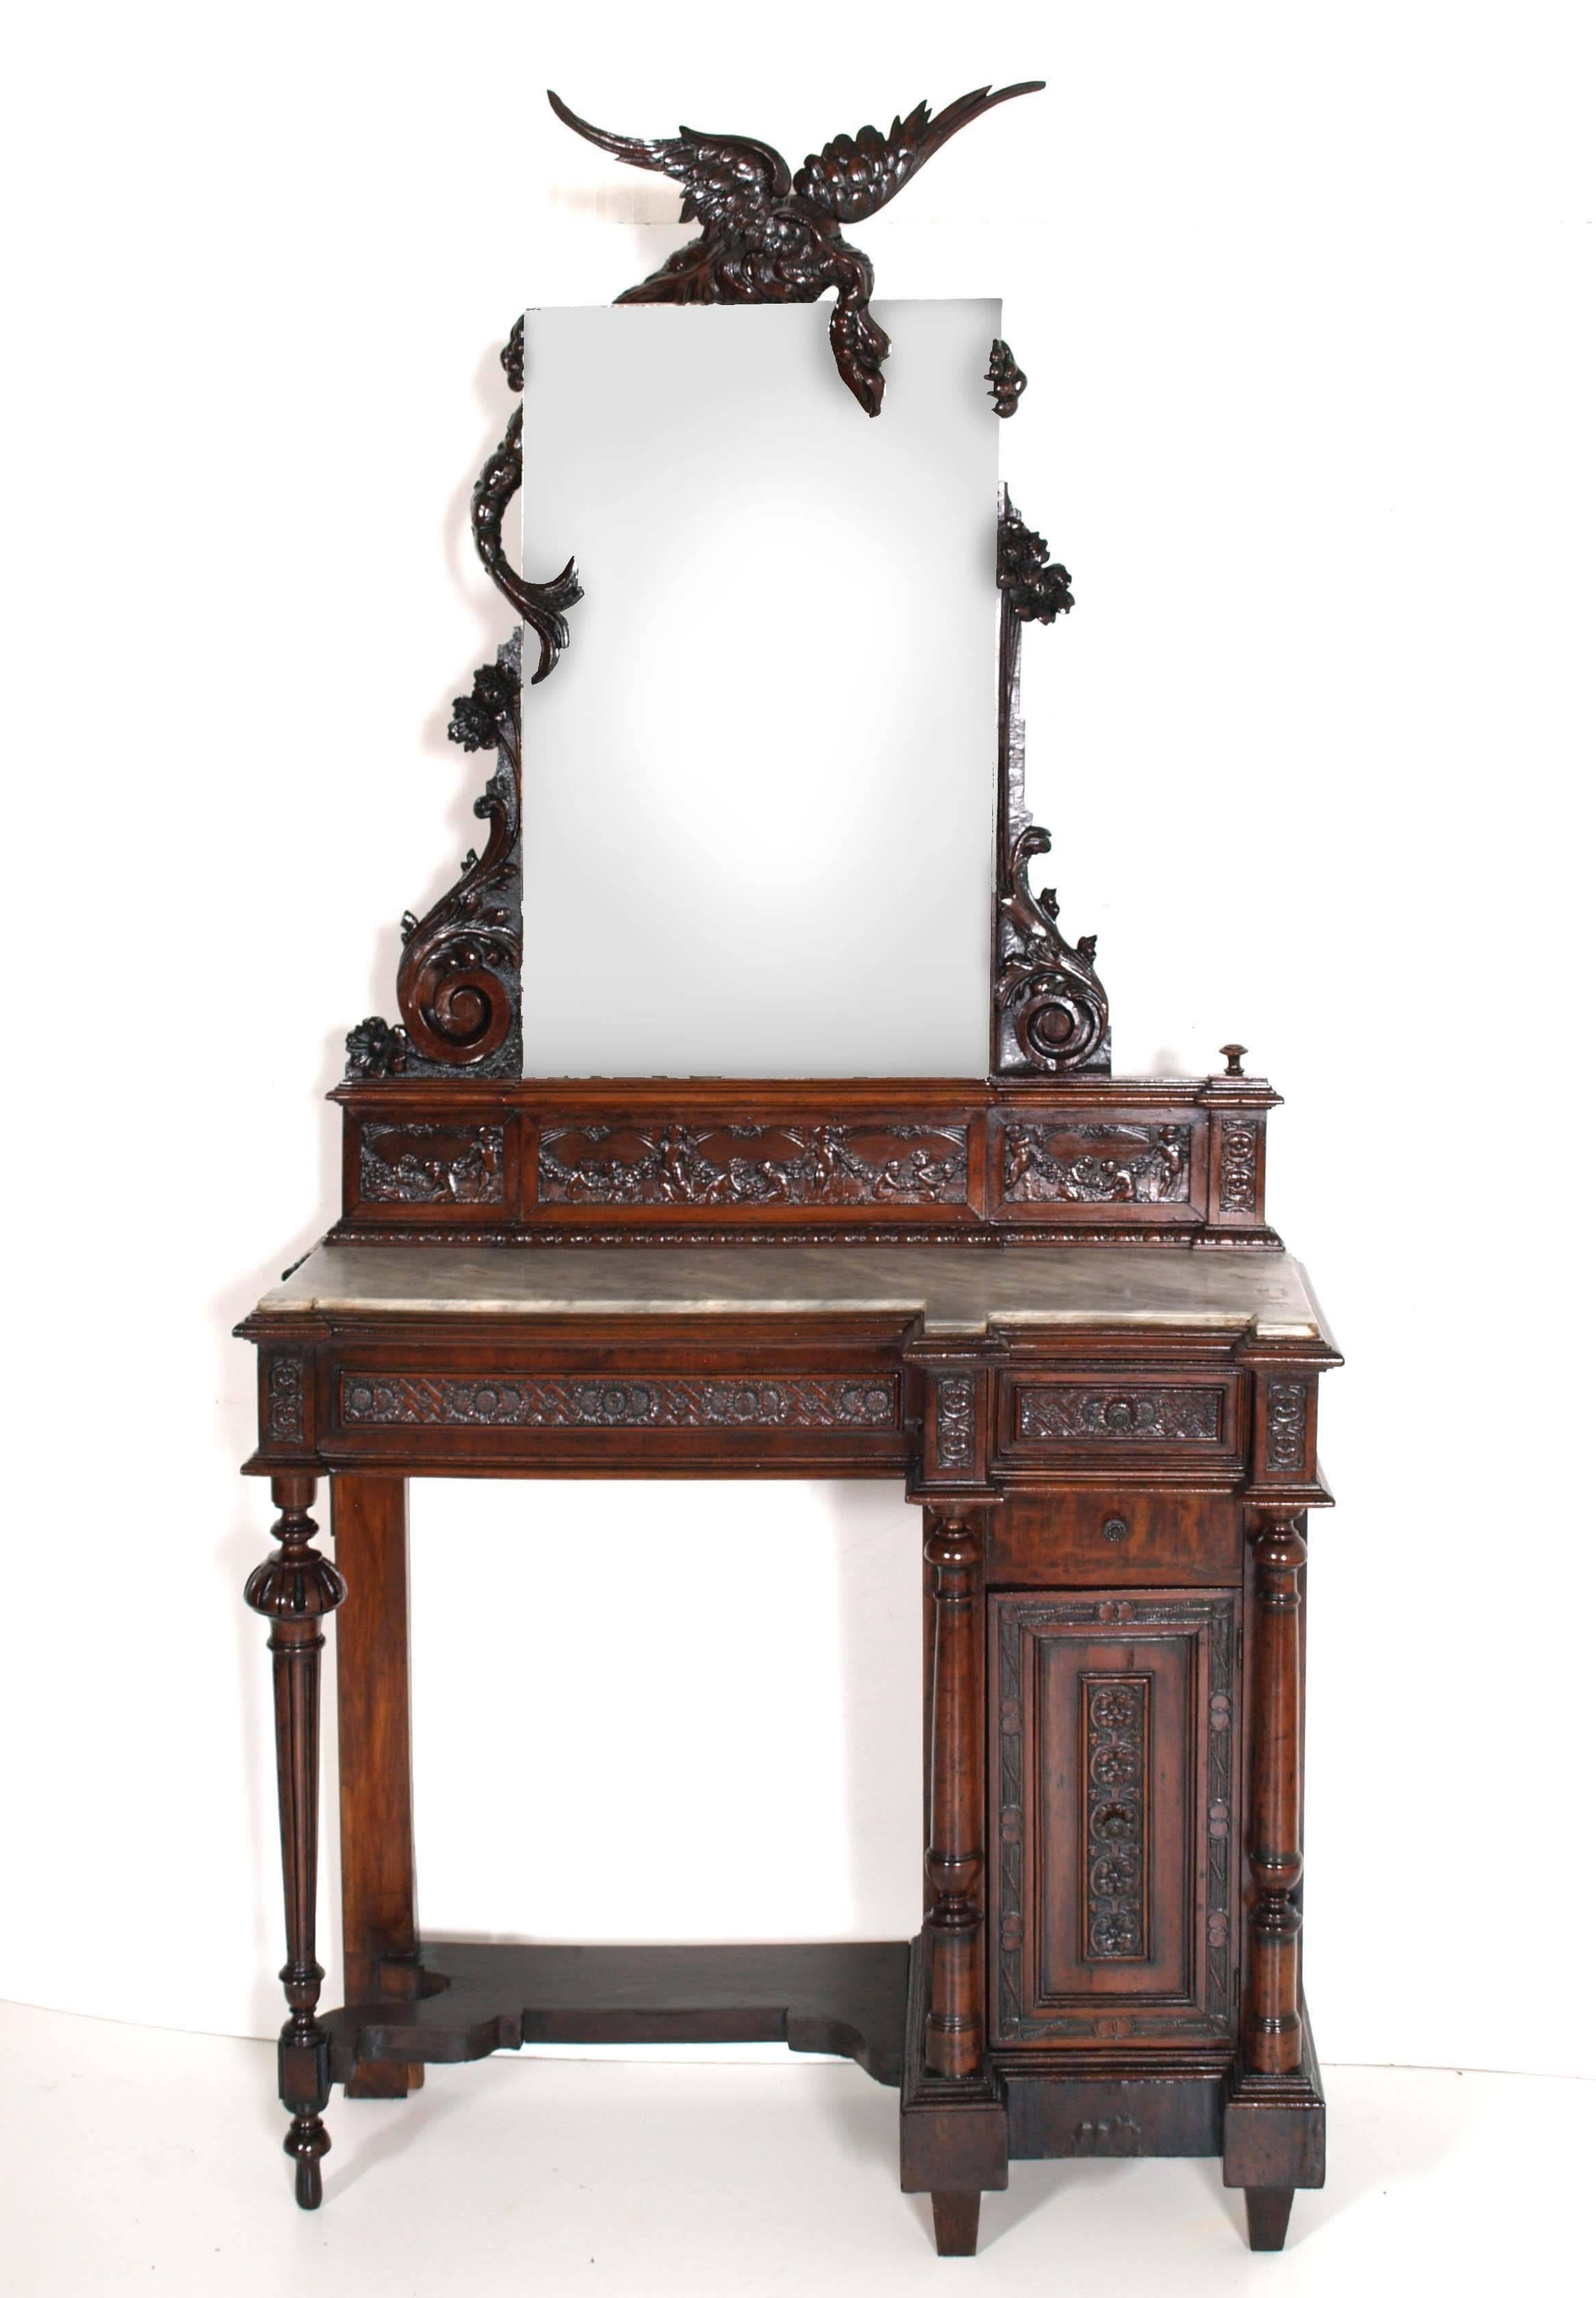 Very importsant console vanity in solid walnut, finely hand-carved, with top shaped grey marble. Very special processing that surrounds the rectangular mirror by Salviati Murano, depicting a griffin or dragon. Floral carvings all performed by hand,